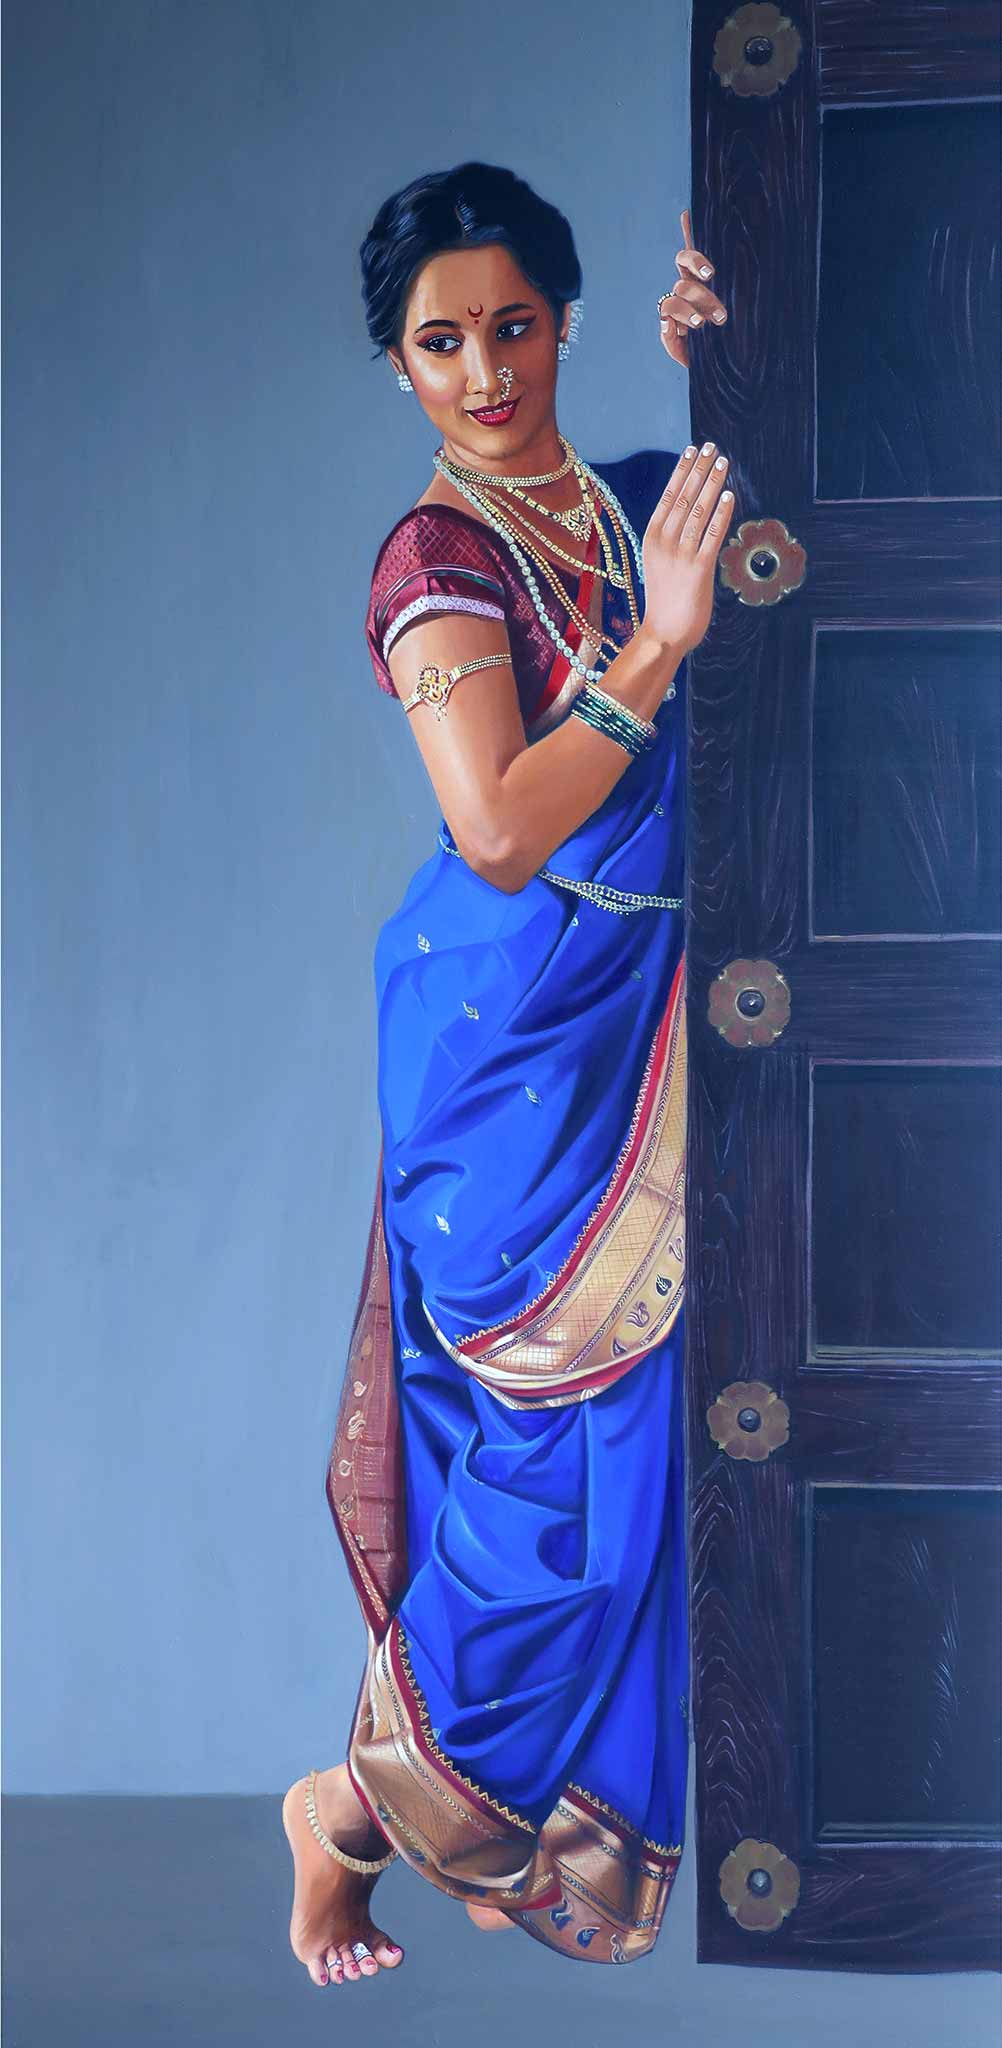 Realism Painting with Oil on Canvas "Madhurima" art by Vinayak G Takalkar